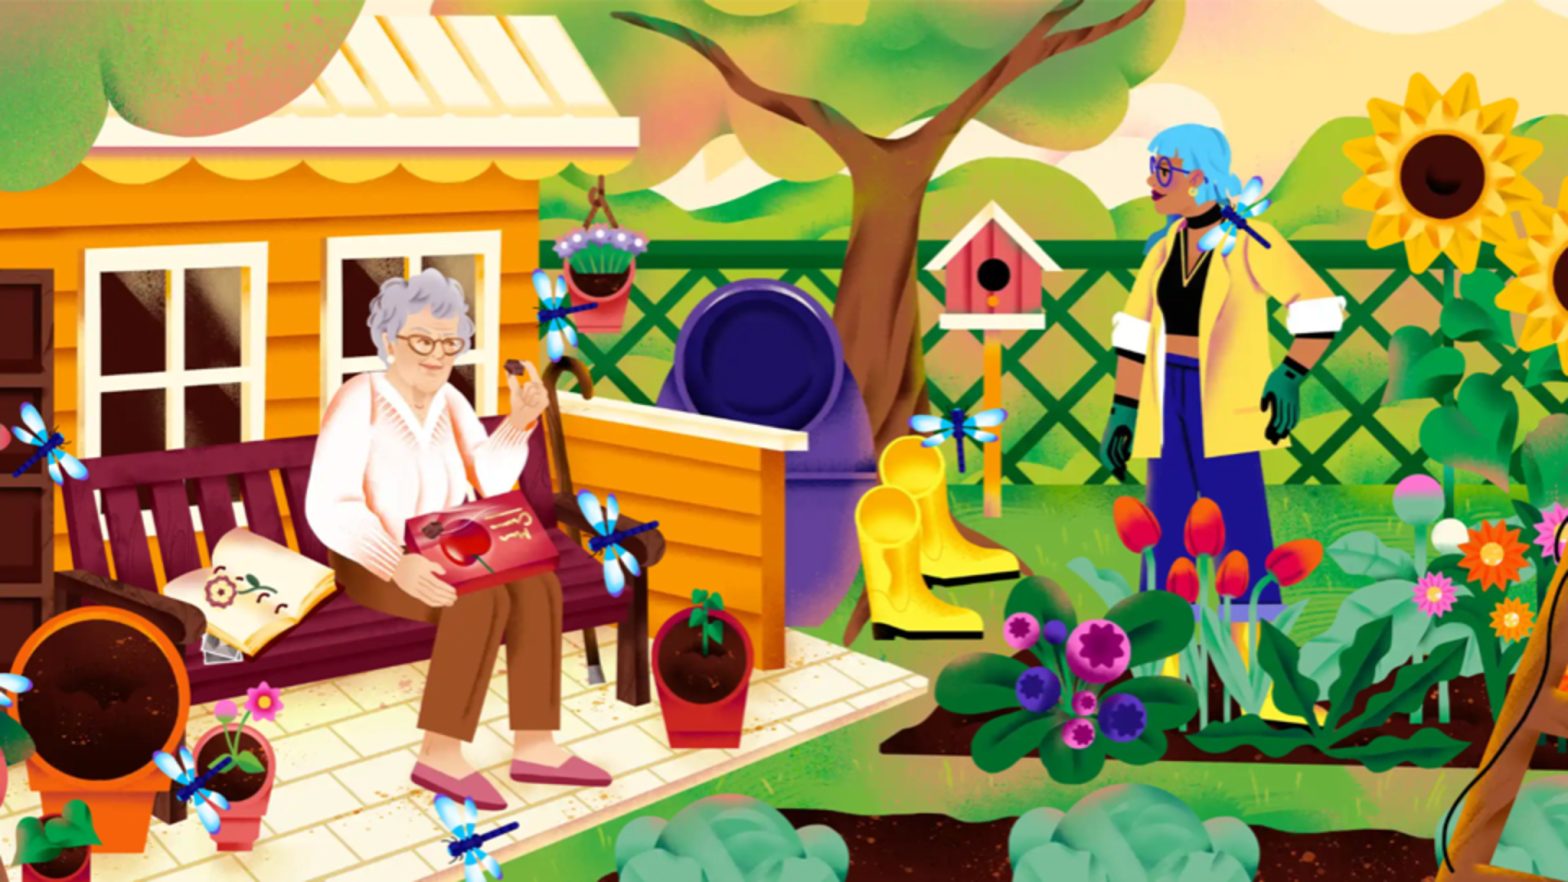 In Finding Hannah, the main character, a woman with blue hair, stands in a garden talking with her grandmother, who is sitting on a bench on a porch.